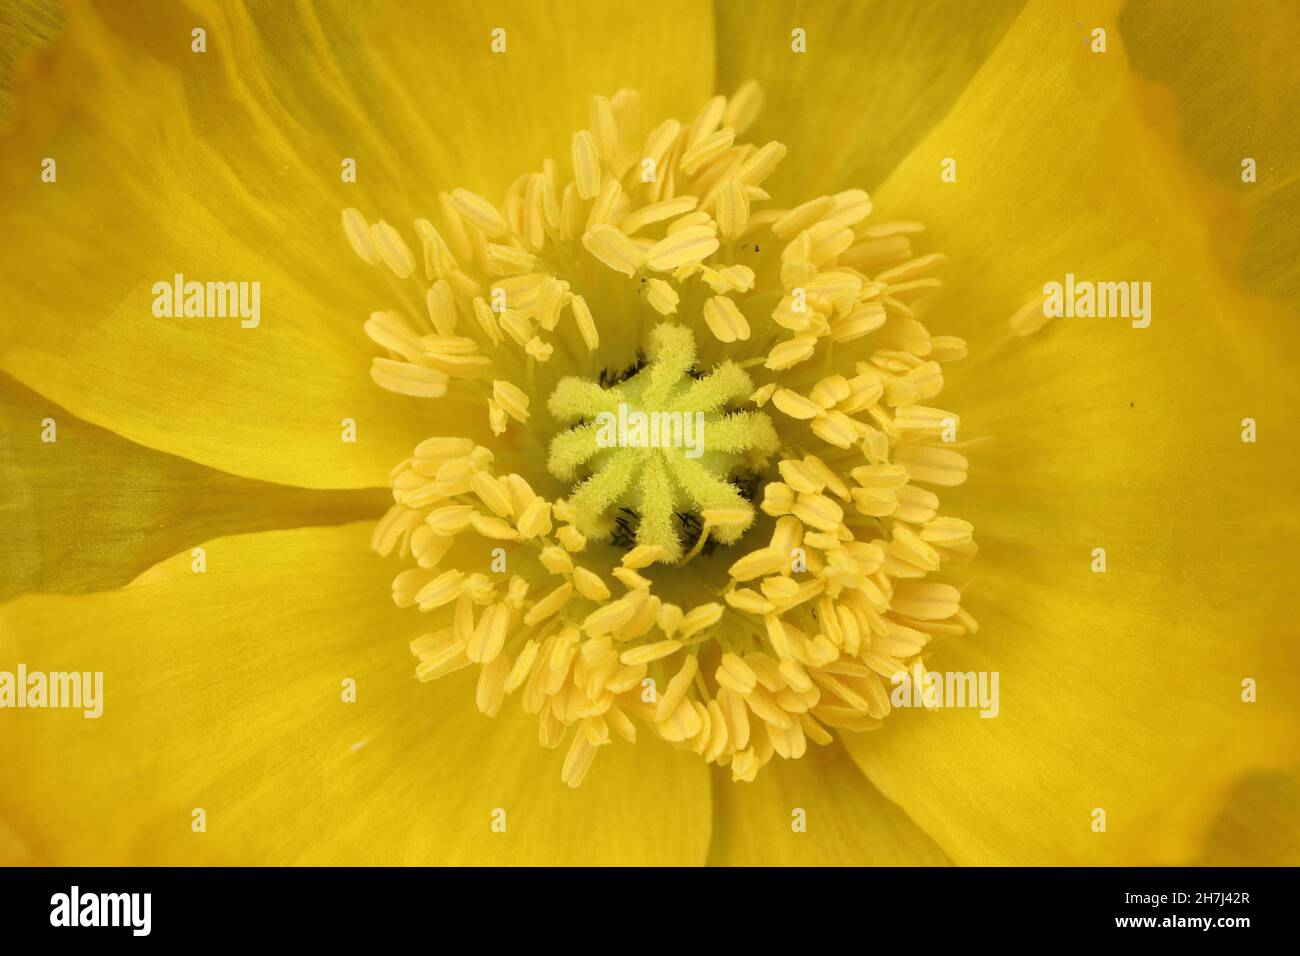 close-up of a single yellow poppy flower with a view from above Stock Photo